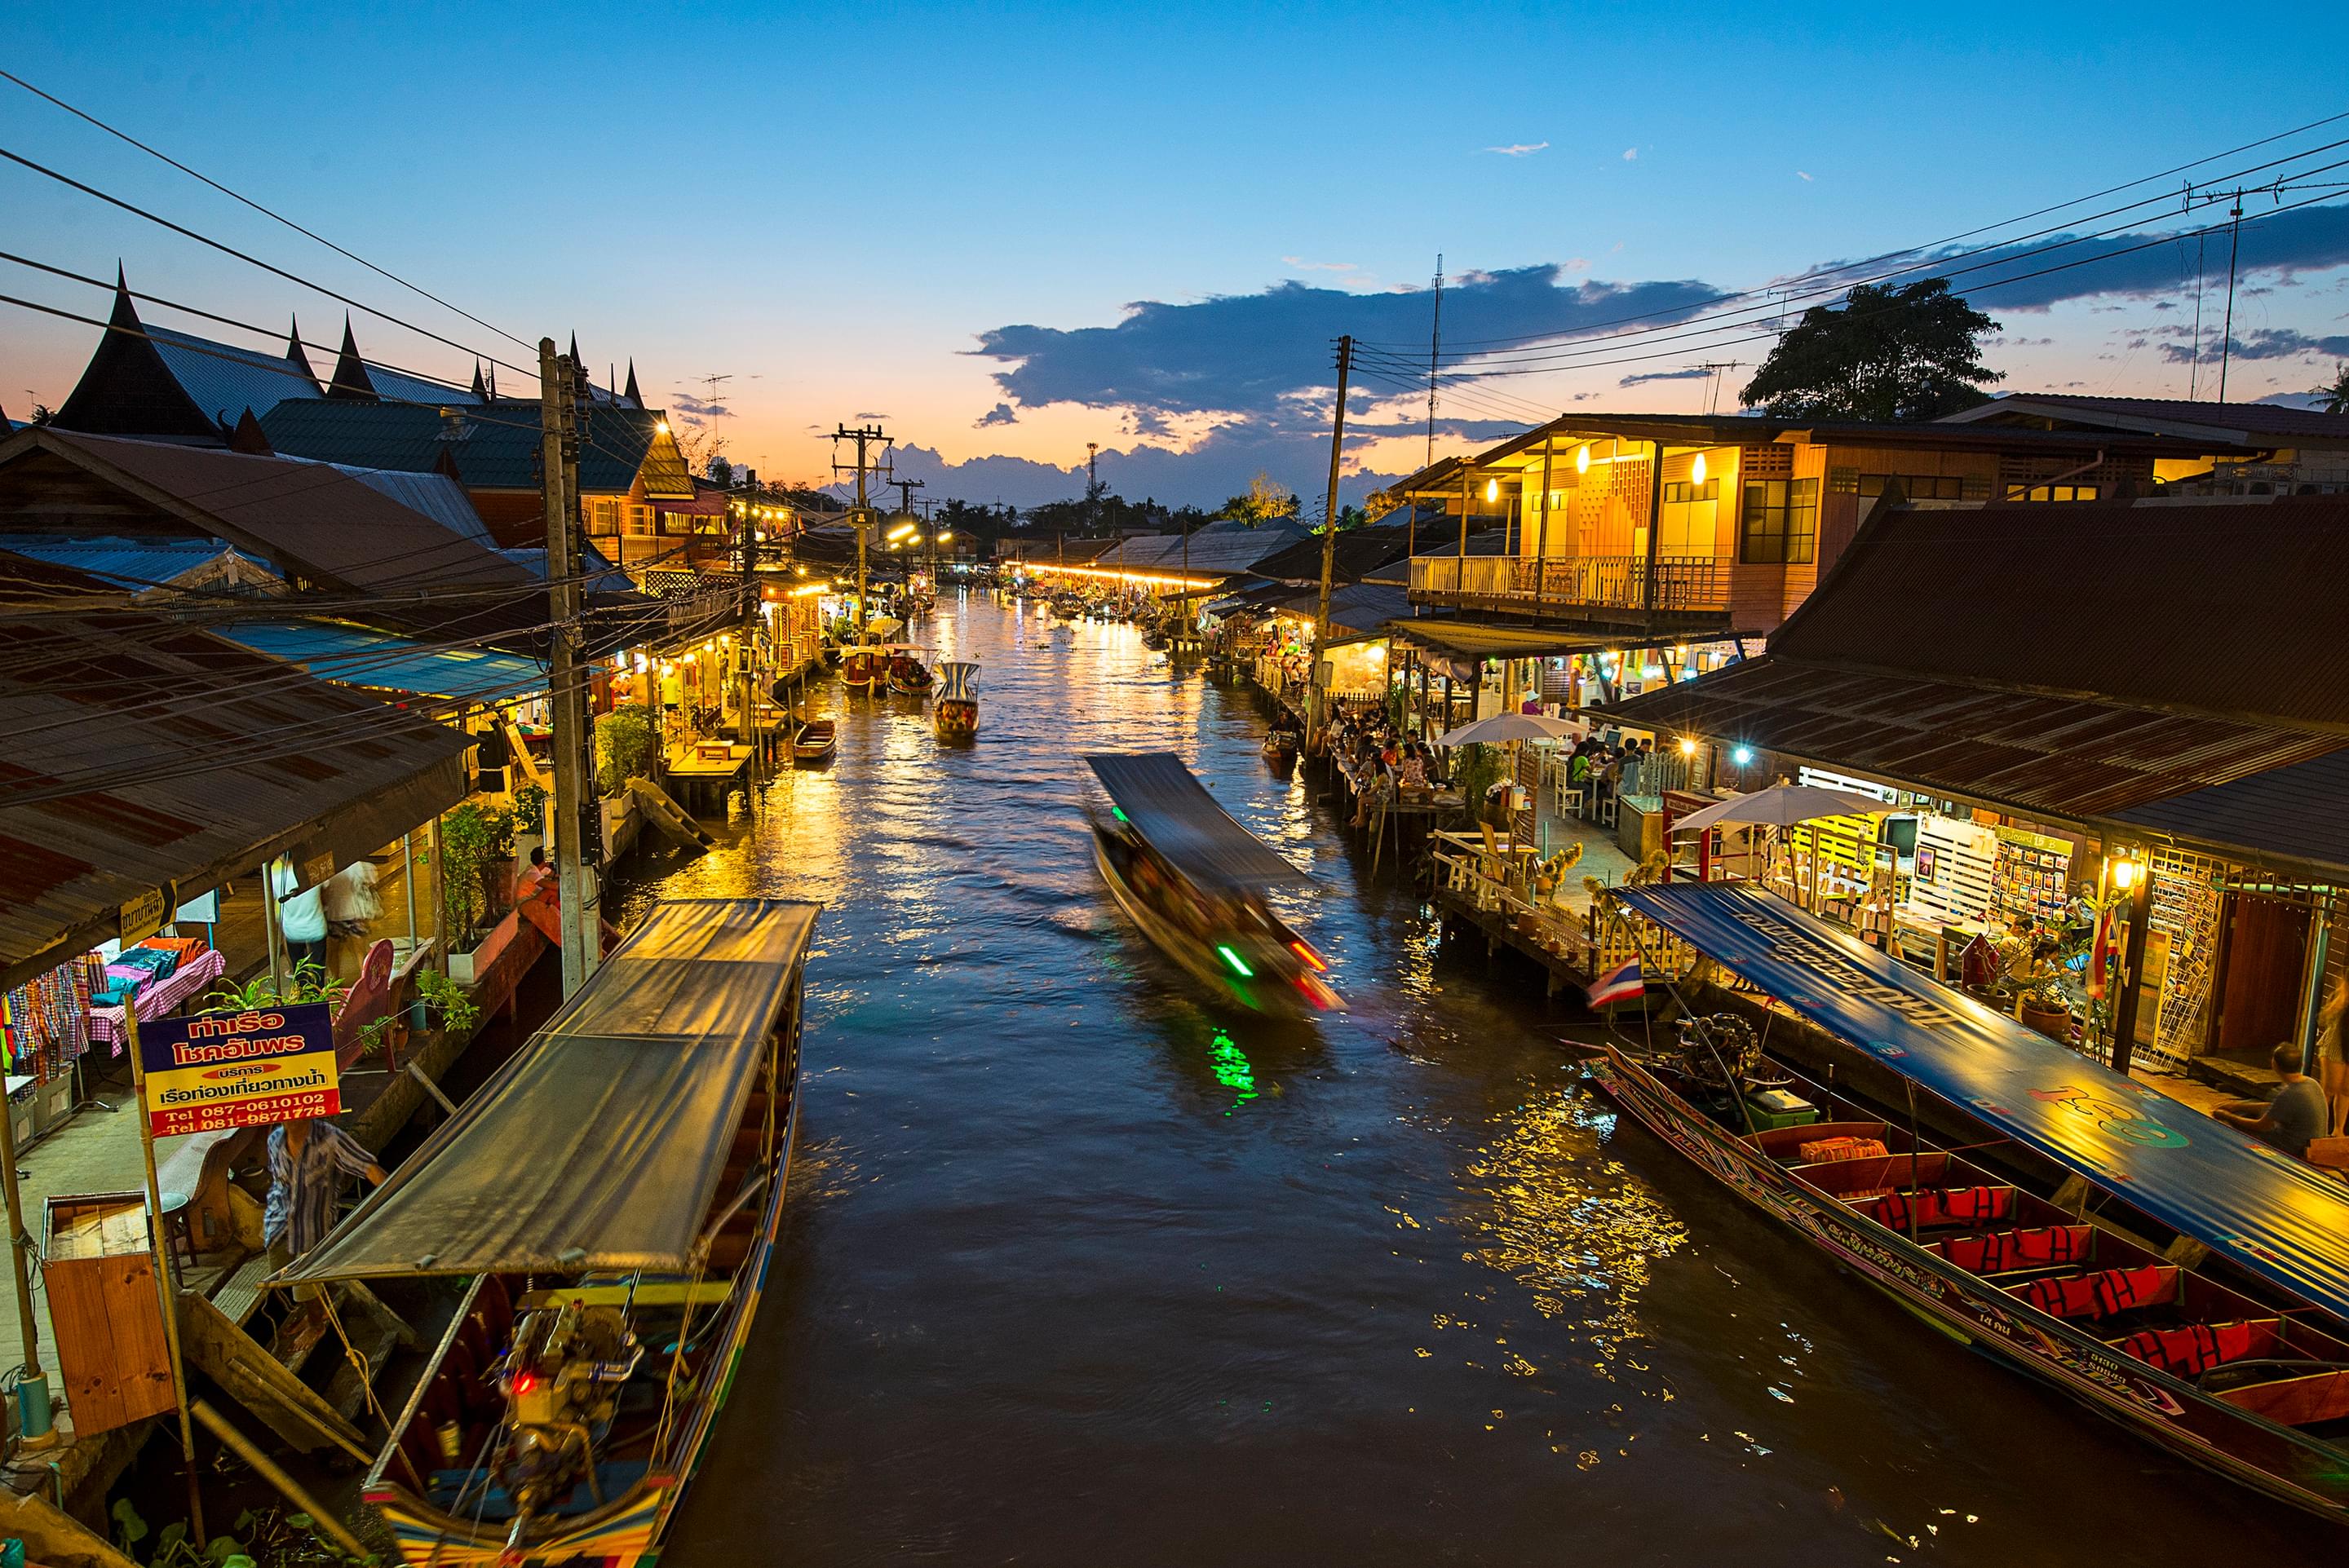 Amphawa Floating Market Overview